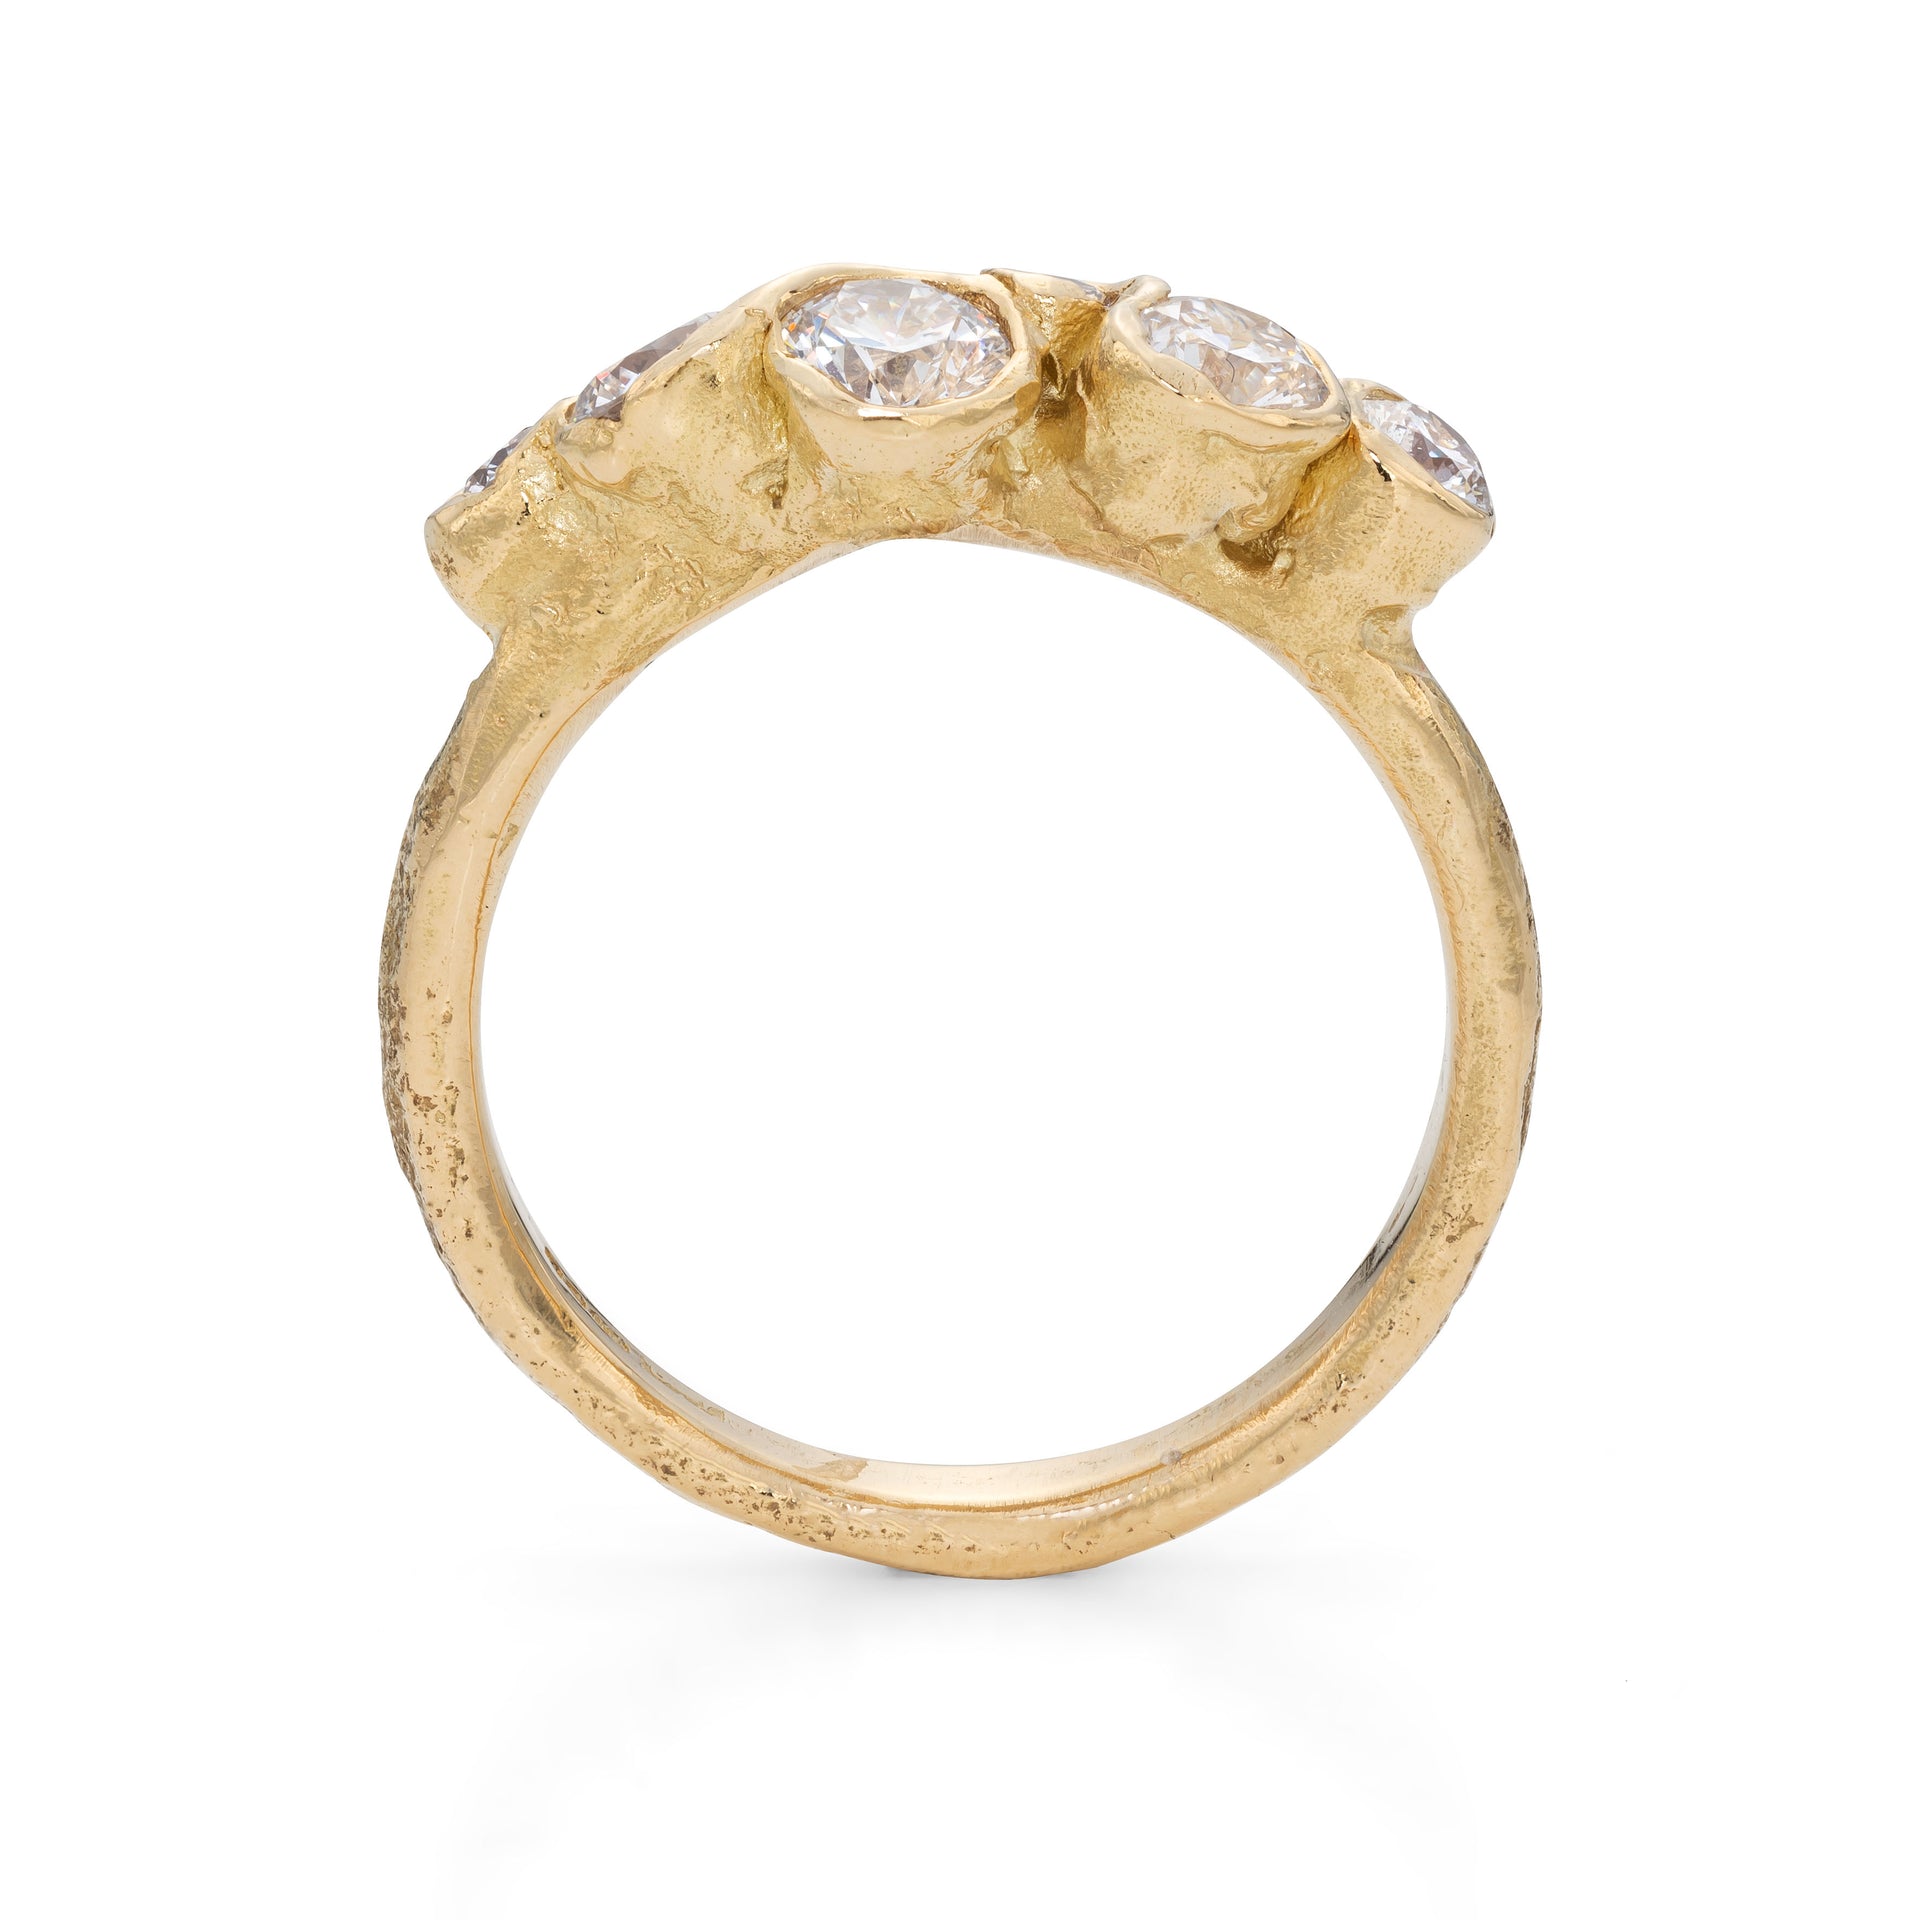 Side profile of a unique, handmade engagement ring created by Emily Nixon, a Cornish jeweller.